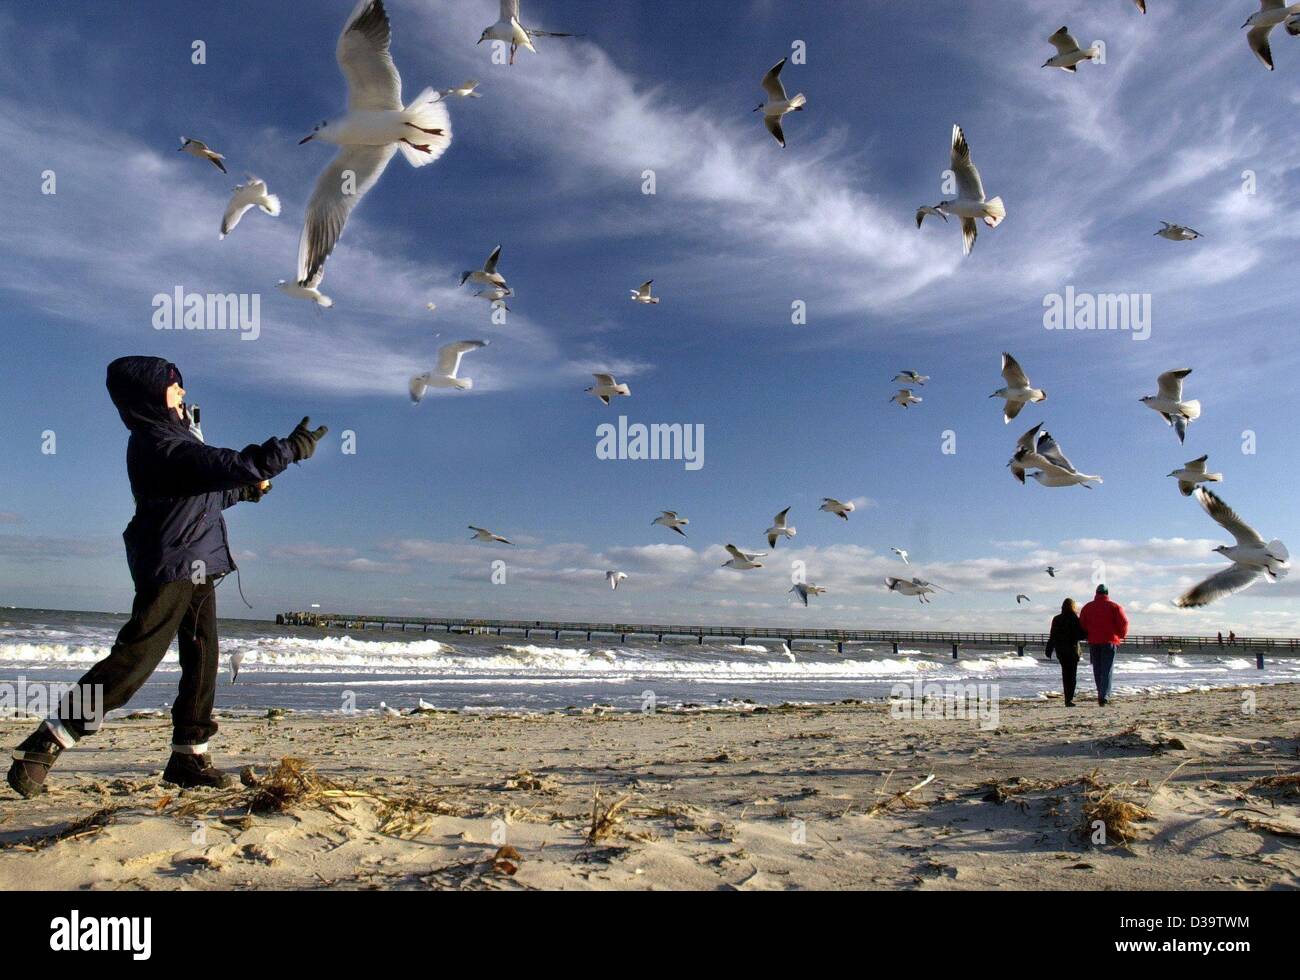 (dpa) - A flock of seagulls circles around a young boy who feeds them bread-crumb on the beach of the Baltic Sea near Boltenhagen, 2.1.2002. The winter season 2001/2002 brought a very cold period to Germany including snow and ice, blue sky and bright sun. Stock Photo